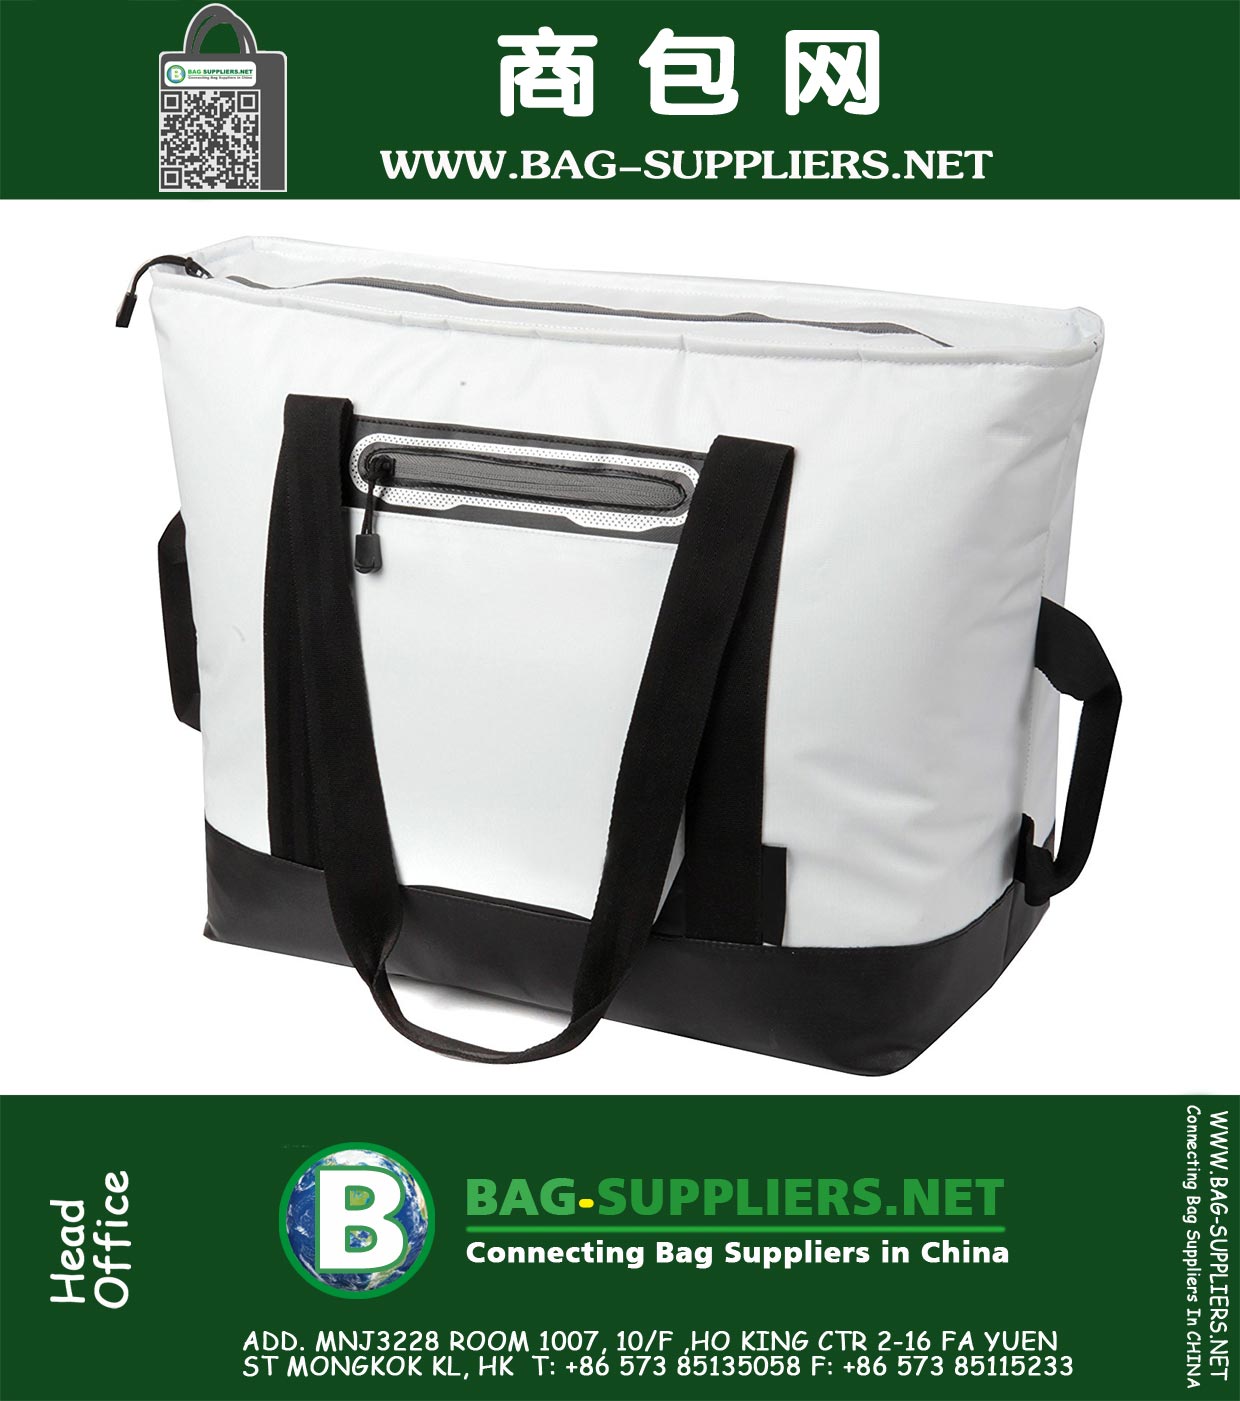 30 Can Insulated Sport Tote